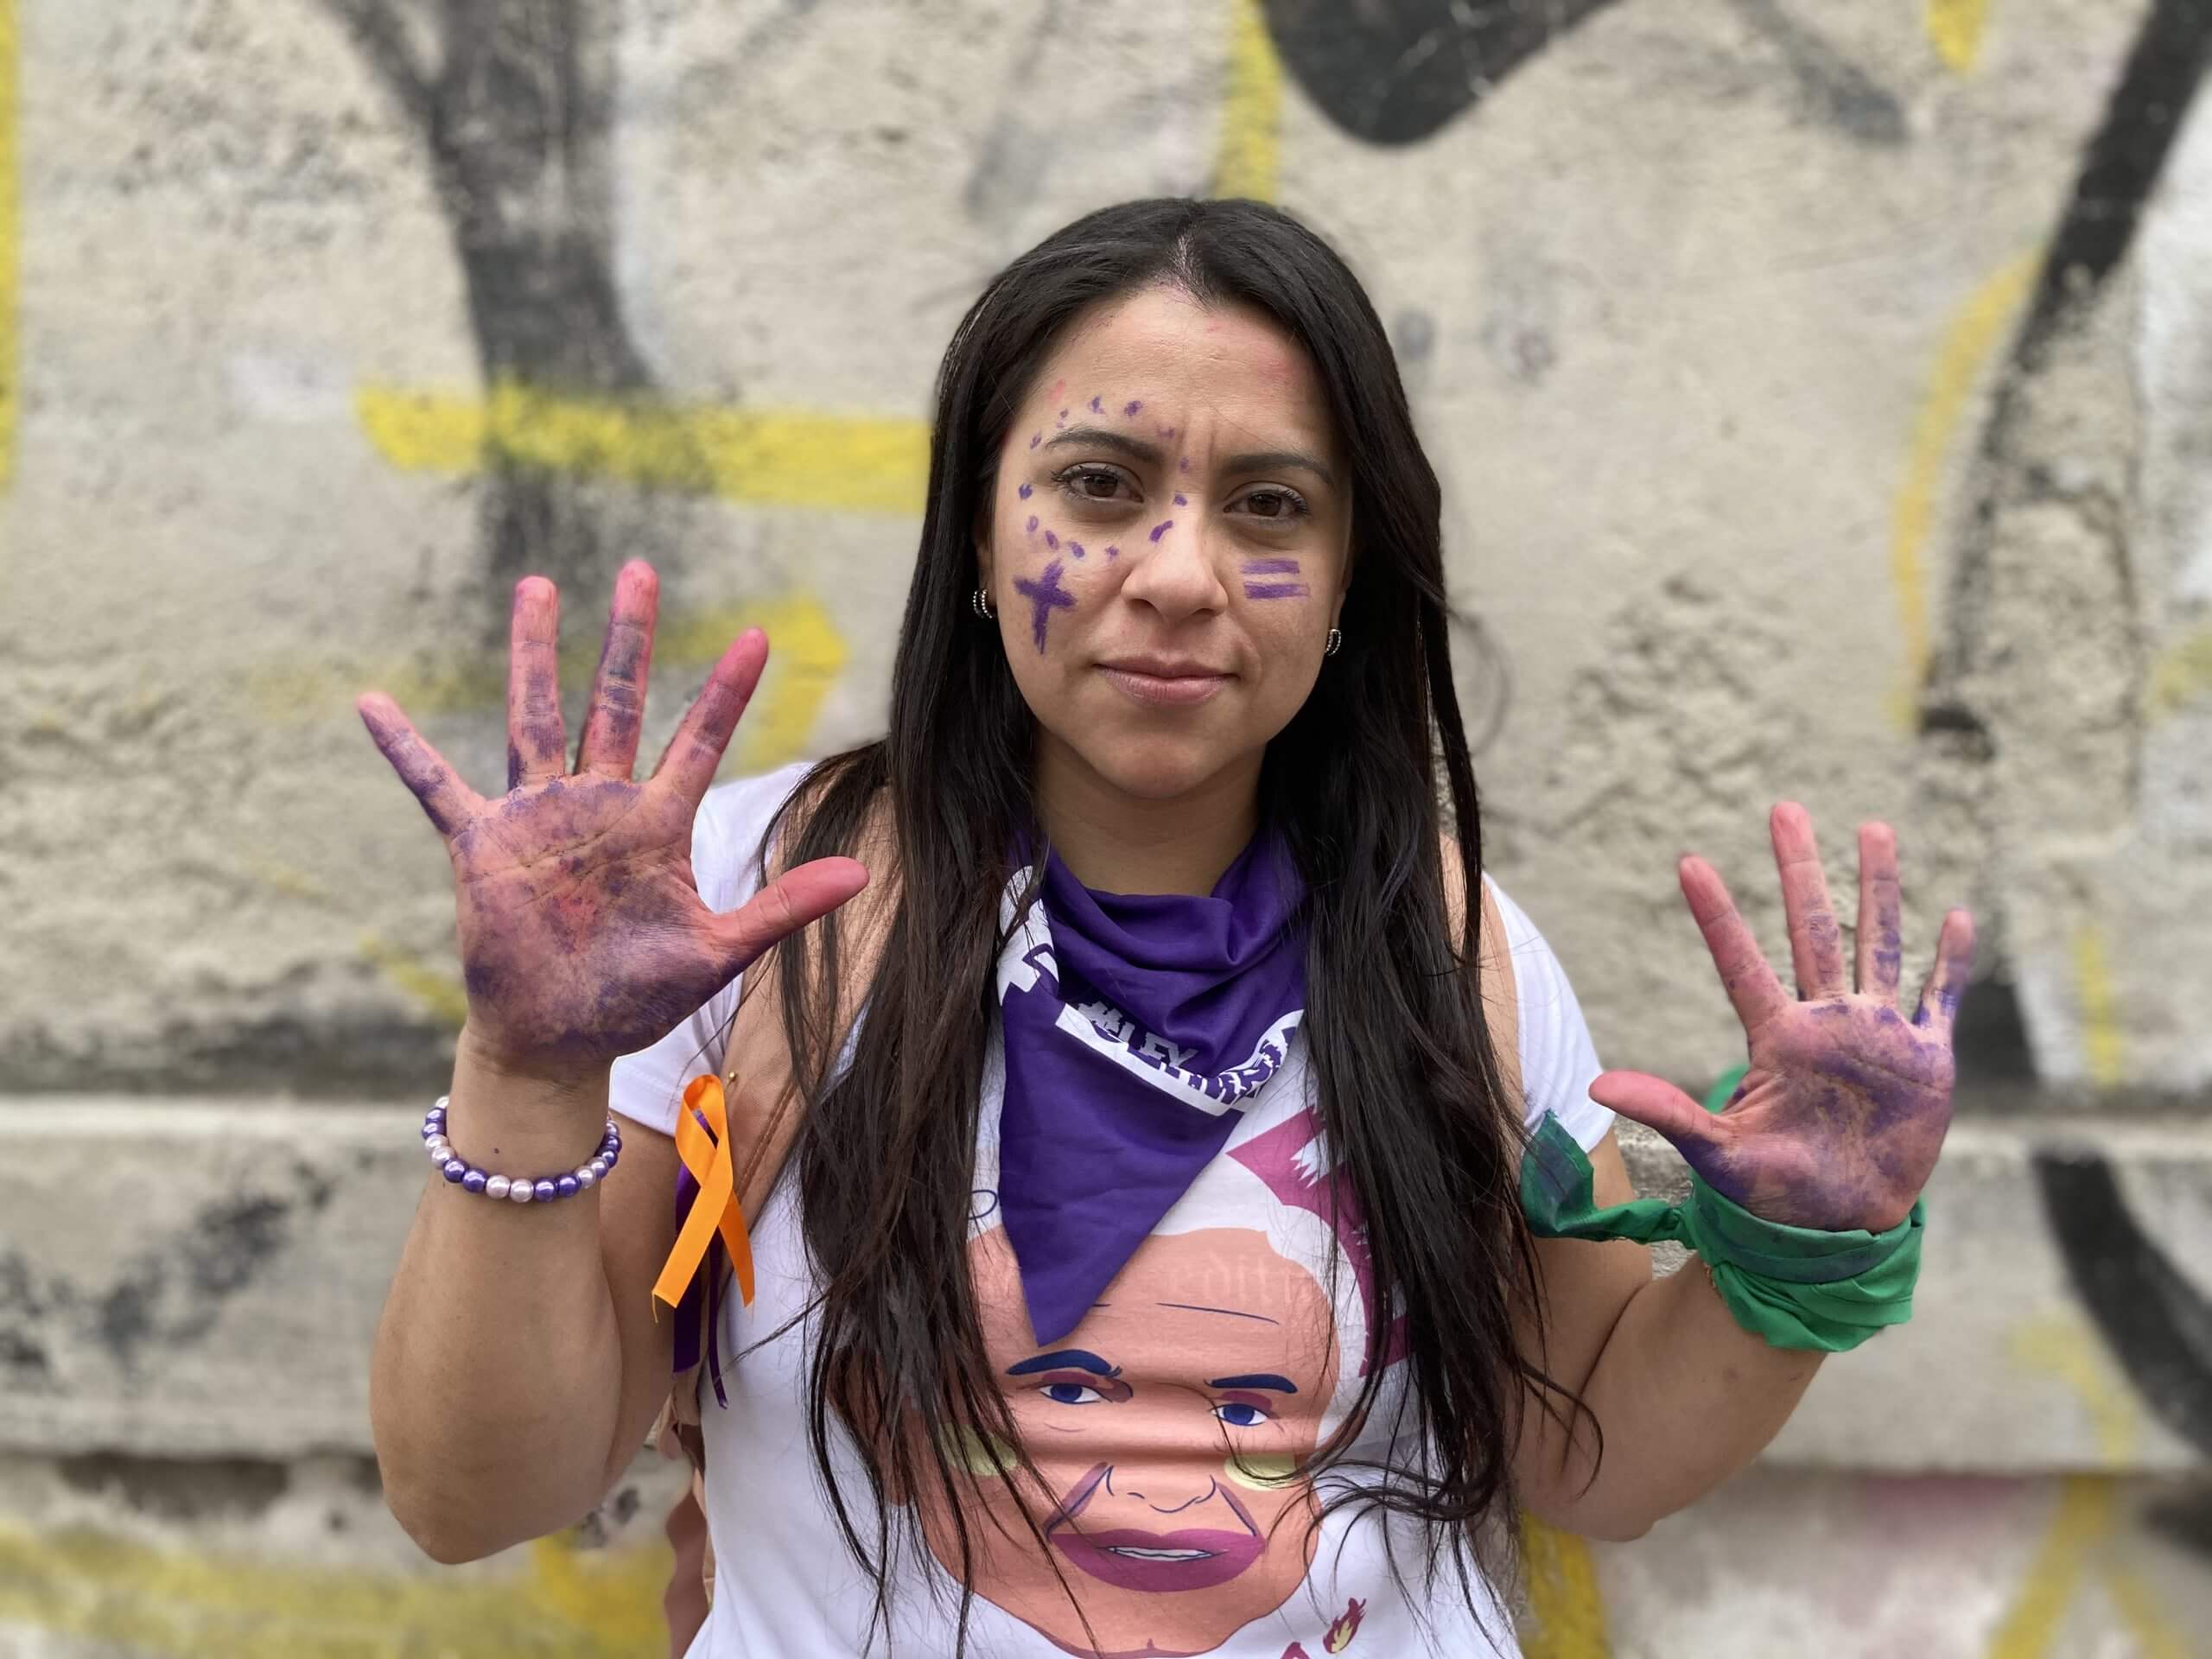 Olimpia Coral Melo after the International Women's Day protest in Mexico City. She shows her face and hands covered in purple marker and wears a purple "Olimpia Law" handkerchief on her neck and a green one on her left wrist.